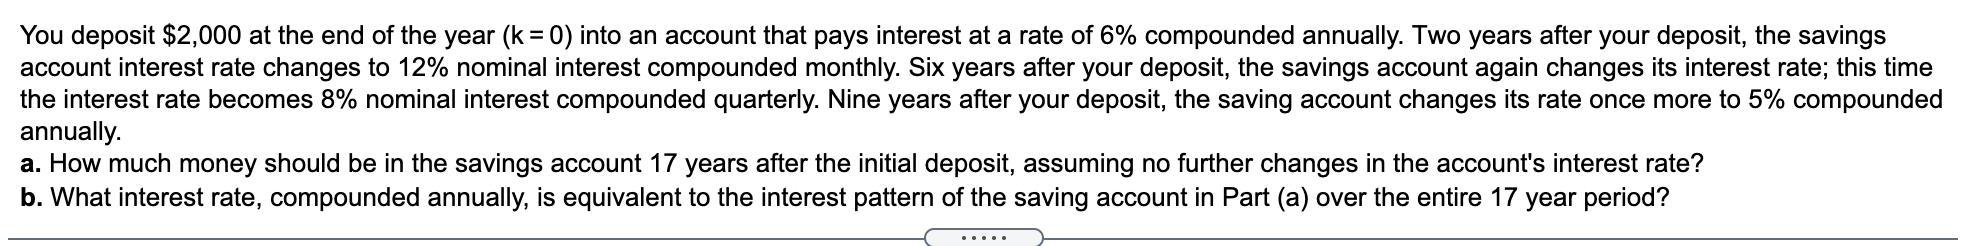 You deposit $2,000 at the end of the year (k = 0) into an account that pays interest at a rate of 6% compounded annually. Two